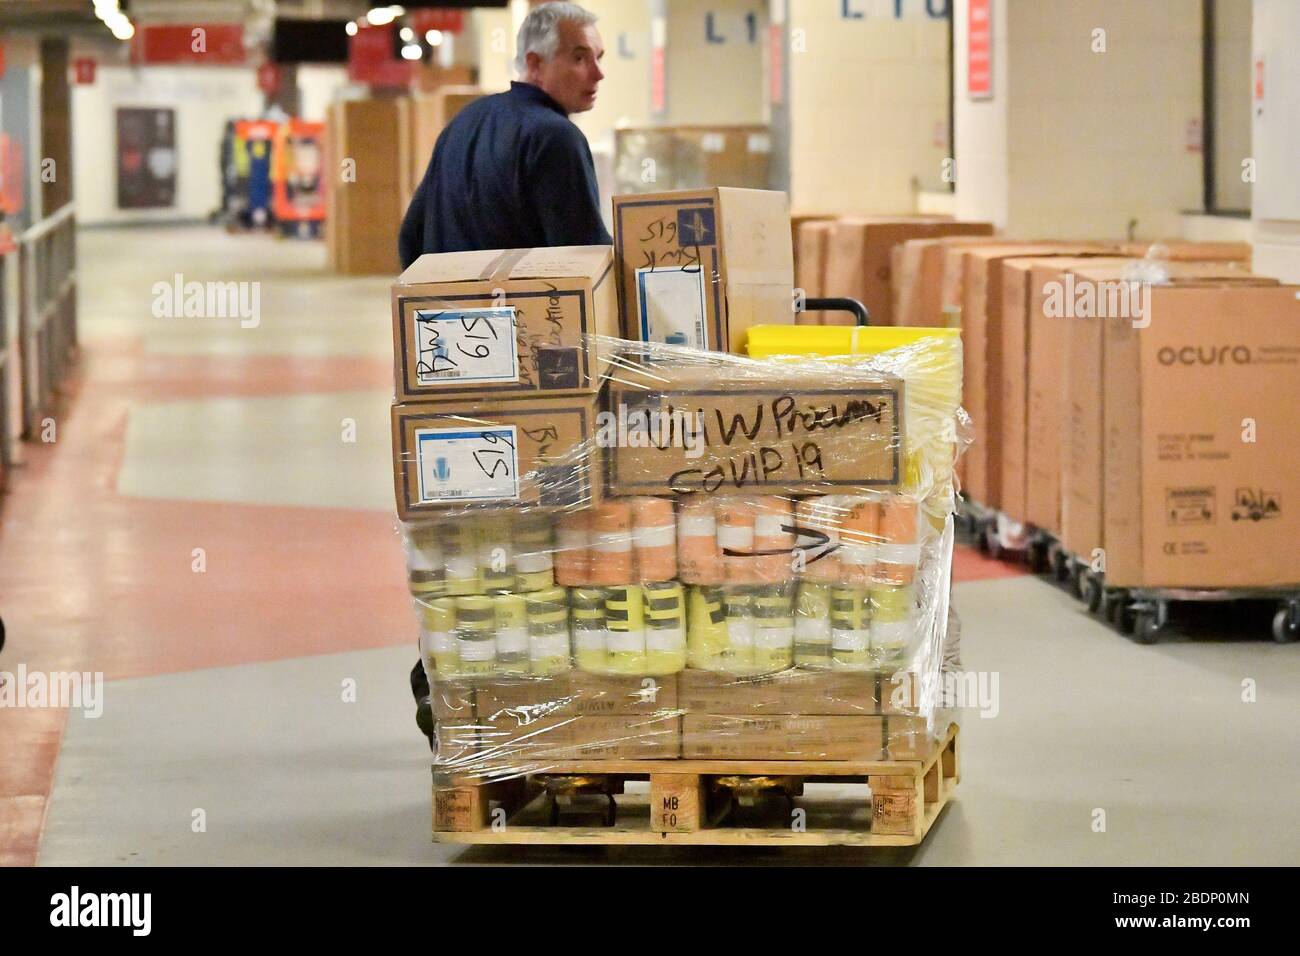 A man moves a pallet of medical supplies labeled covid-19 inside the Principality Stadium, Cardiff, which is being turned into a 2000-bed hospital to help fight coronavirus. Stock Photo